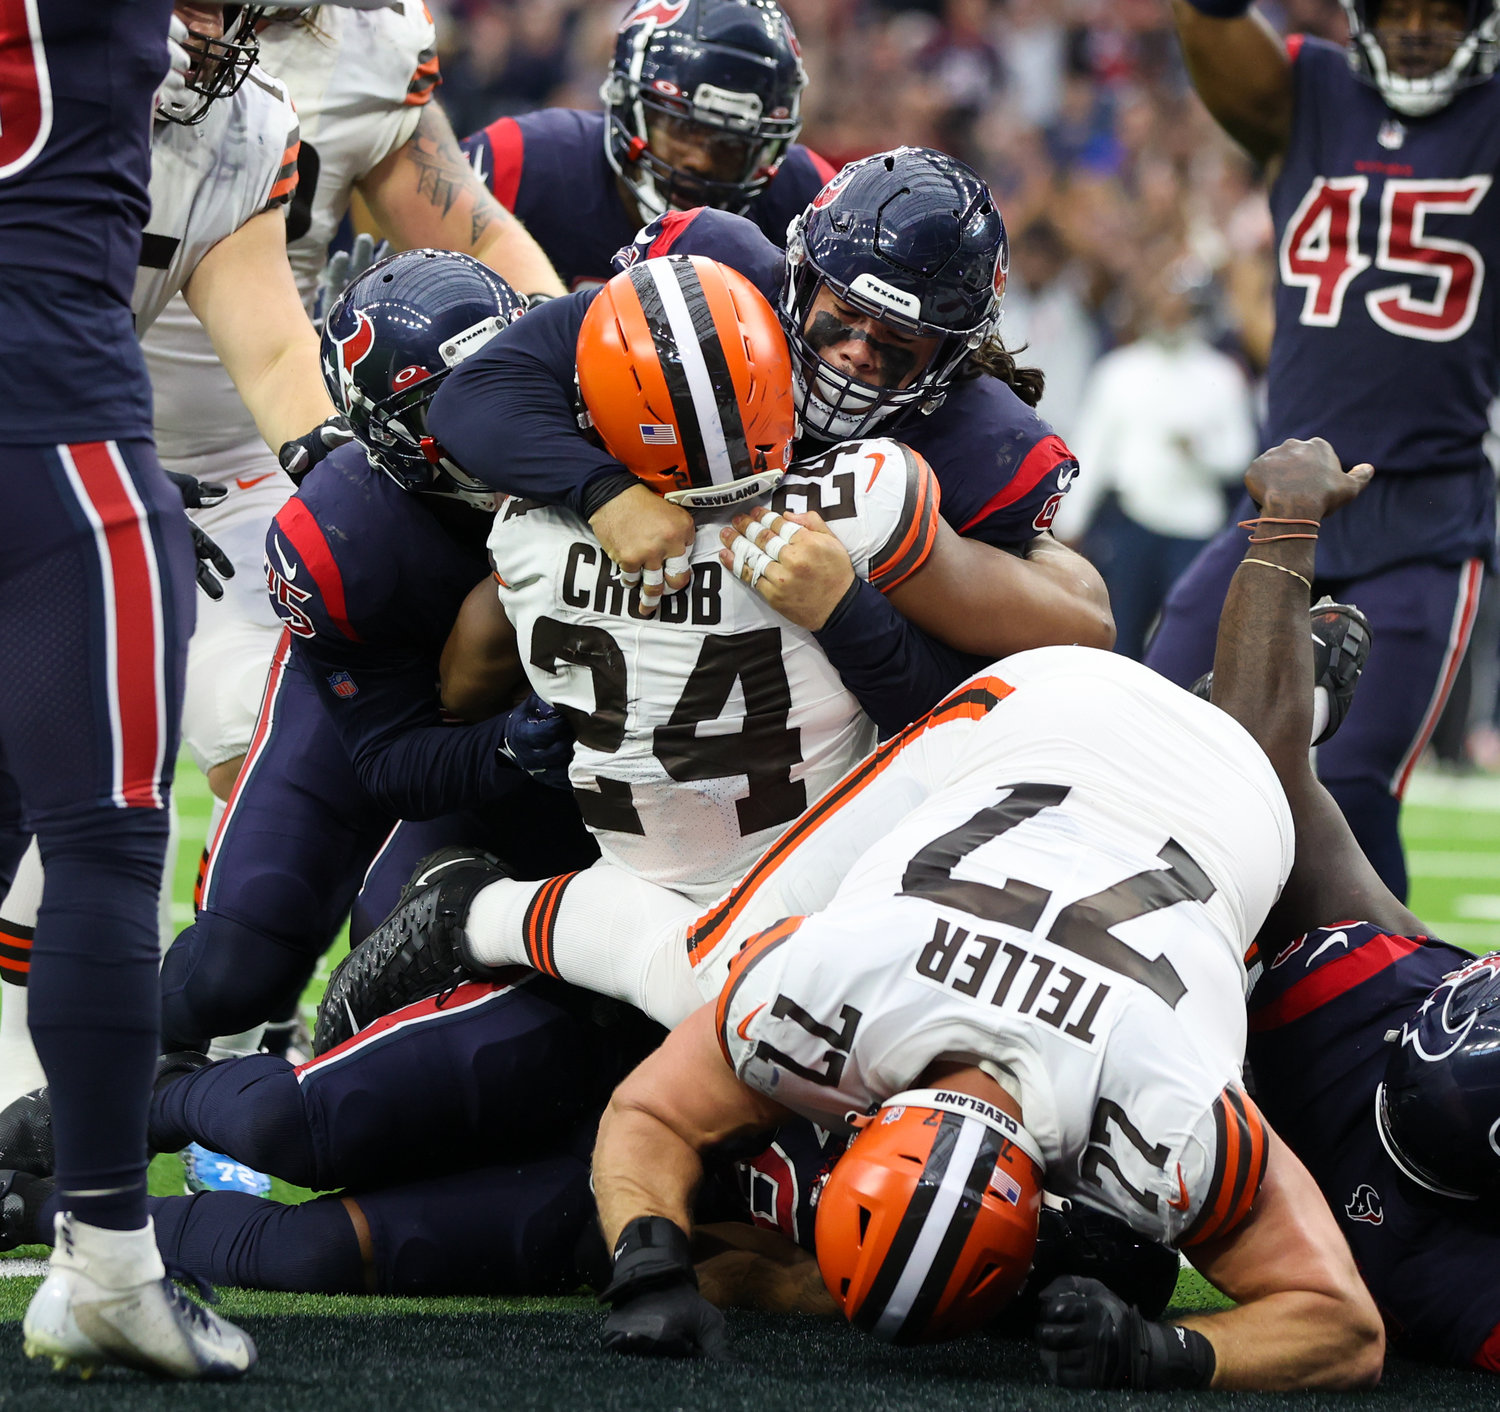 The Houston Texans defense stops Cleveland Browns running back Nick Chubb in the end zone for a safety during an NFL game between the Houston Texans and the Cleveland Browns on Dec. 4, 2022, in Houston. The Browns won, 27-14.